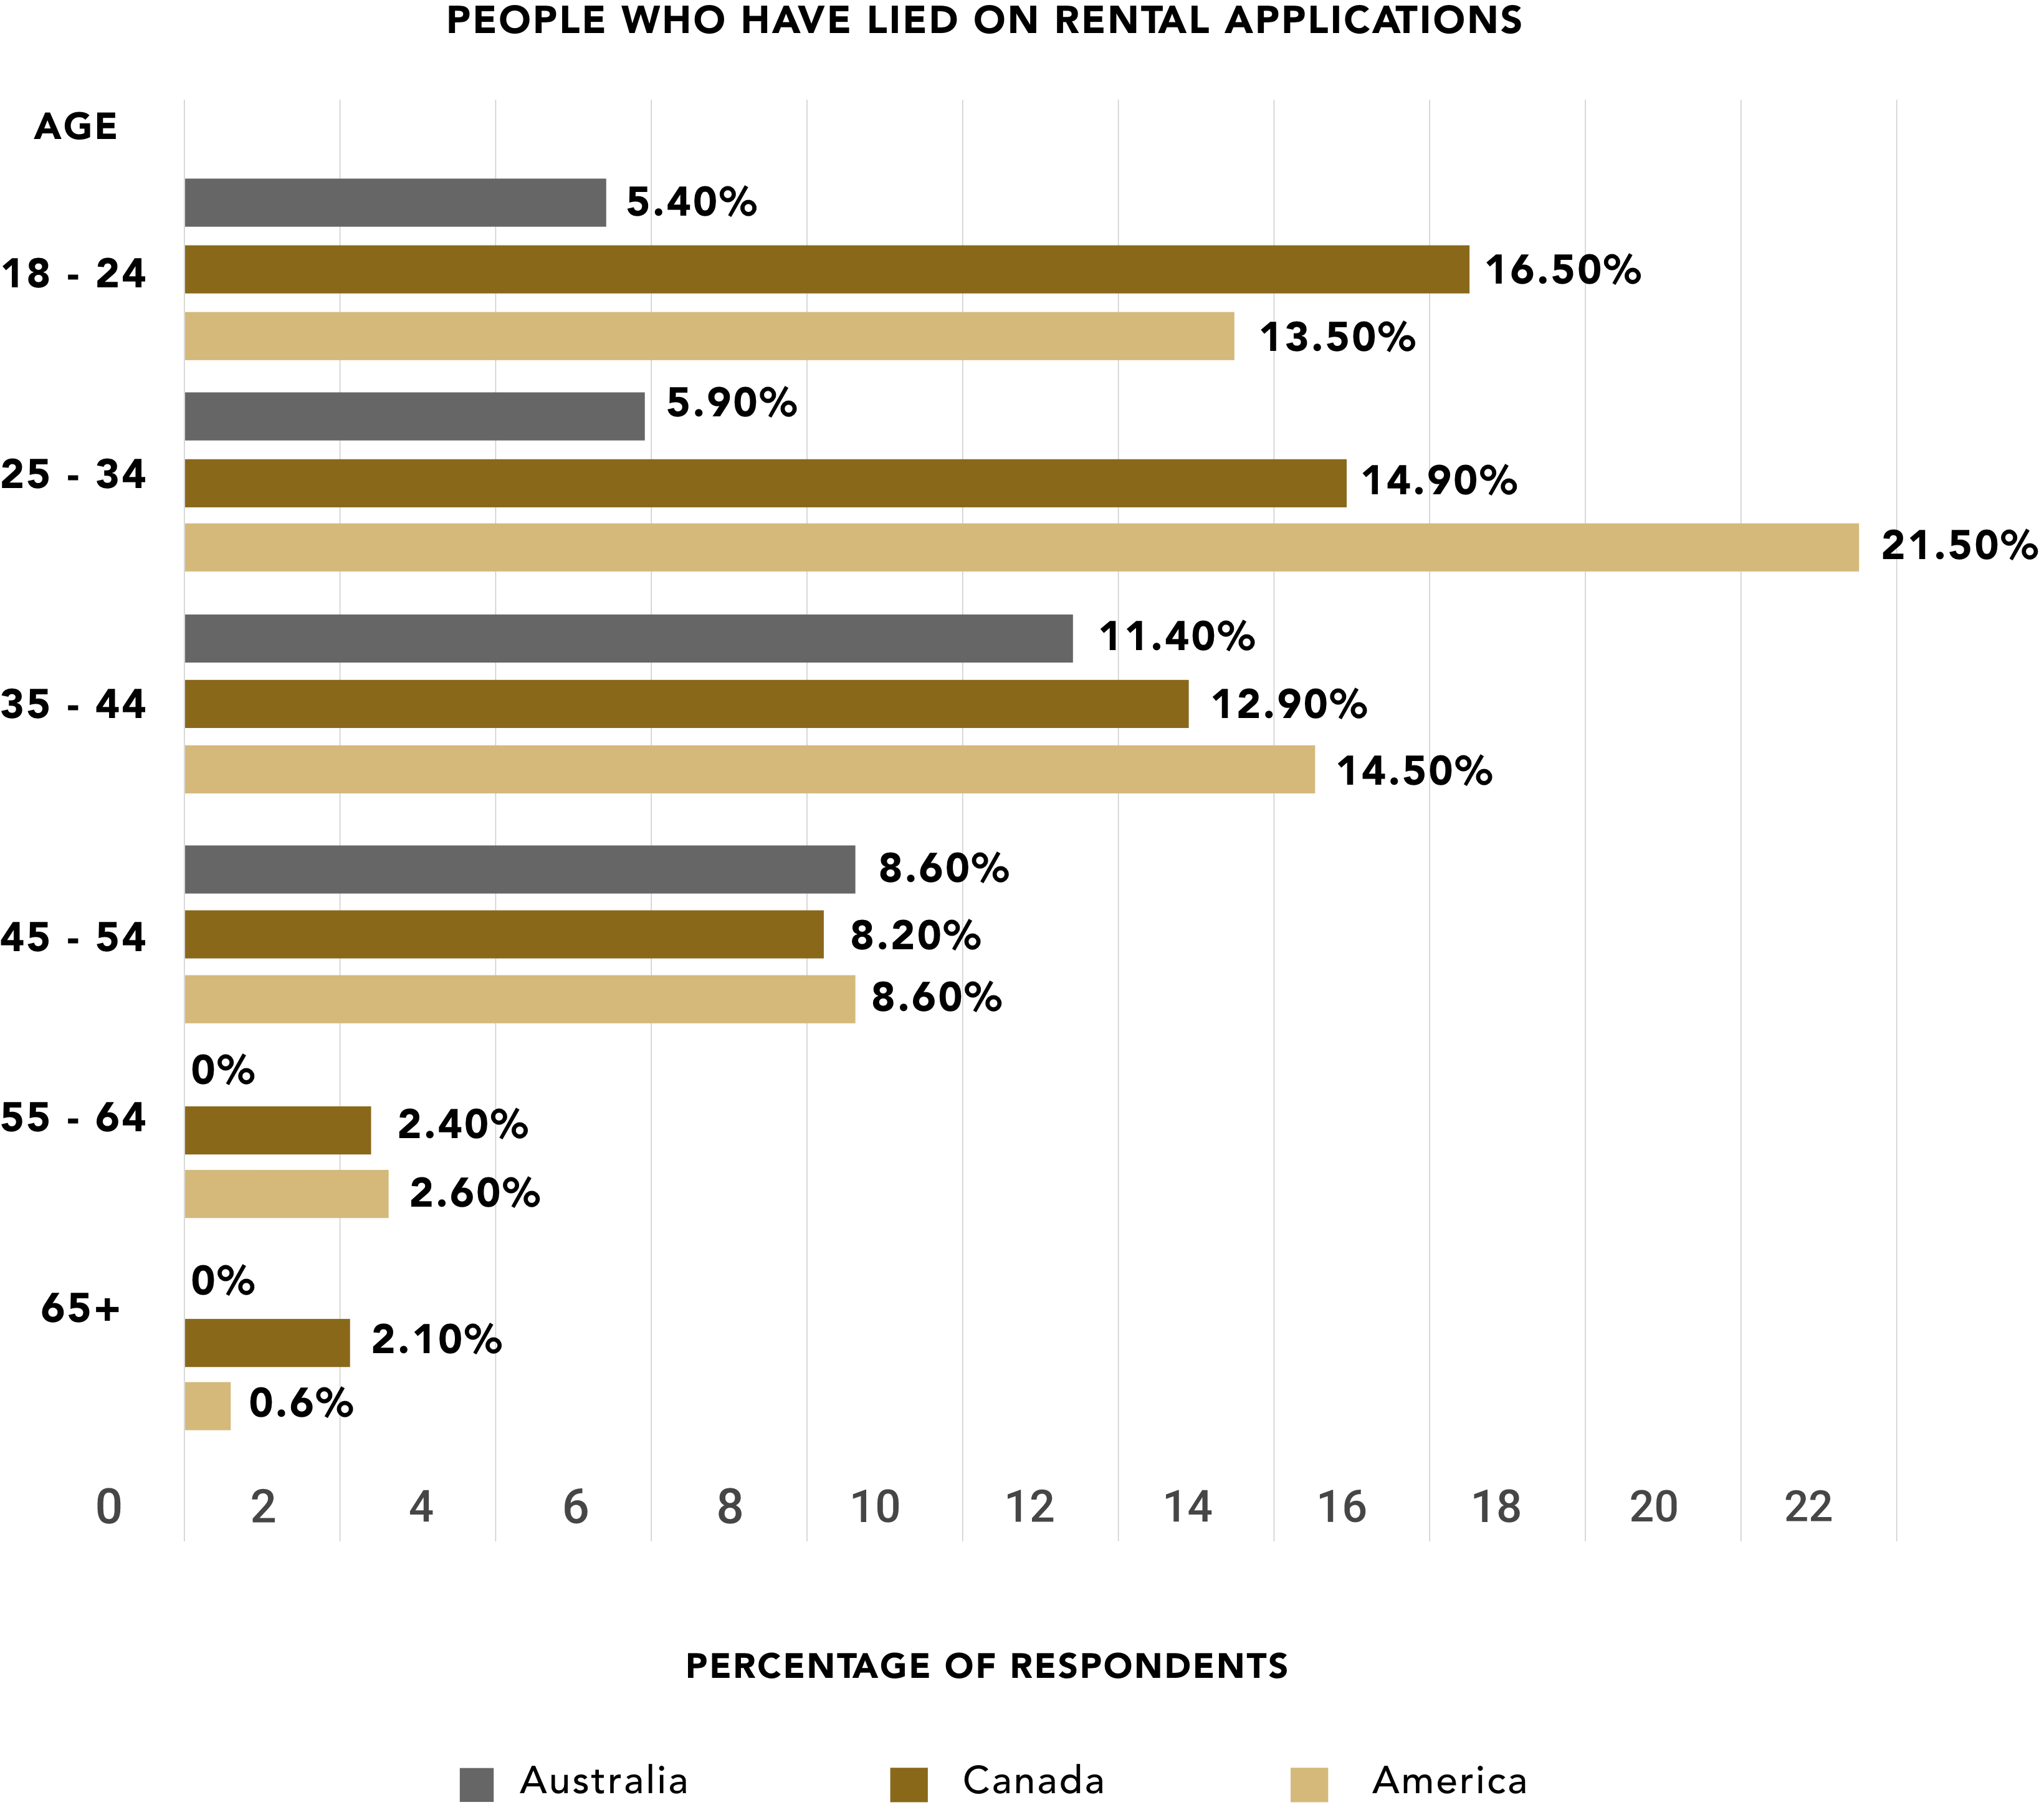 Bar chart showing the number of people from each age group who have lied on rental applications from Australia, Canada and America